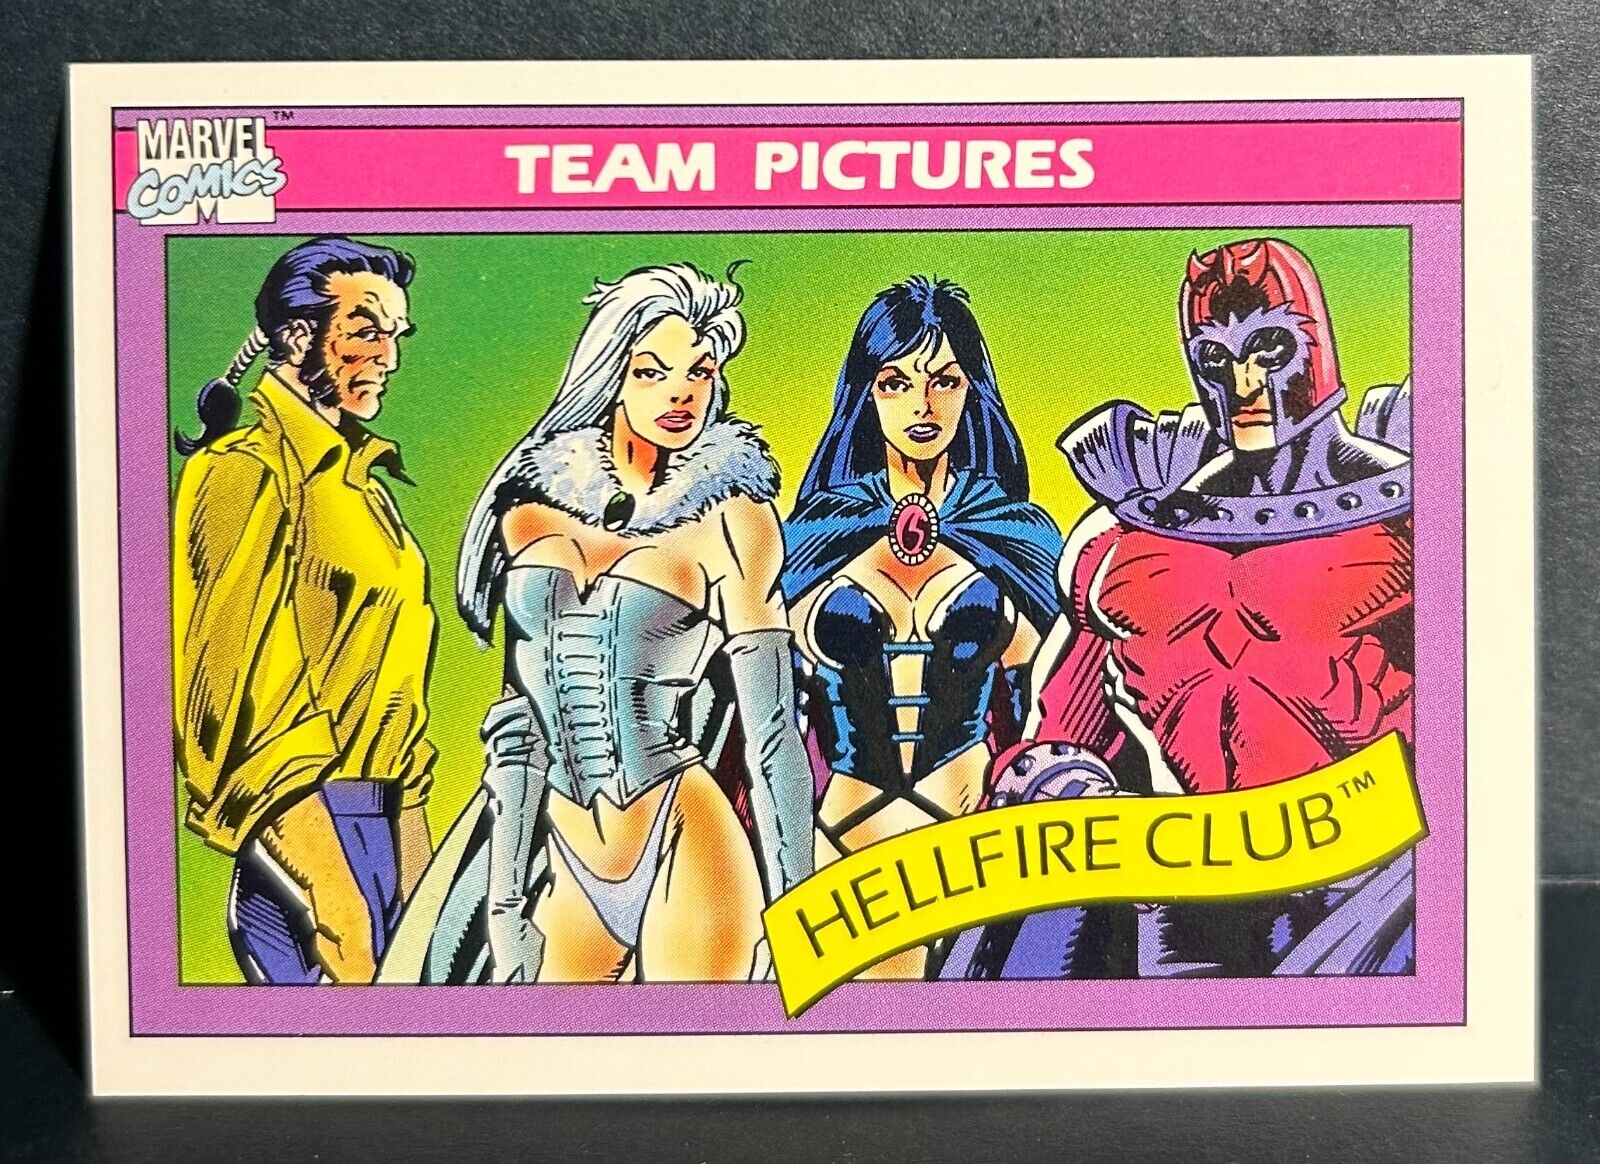 1990 Marvel Impel Team Pictures Hellfire Club #147